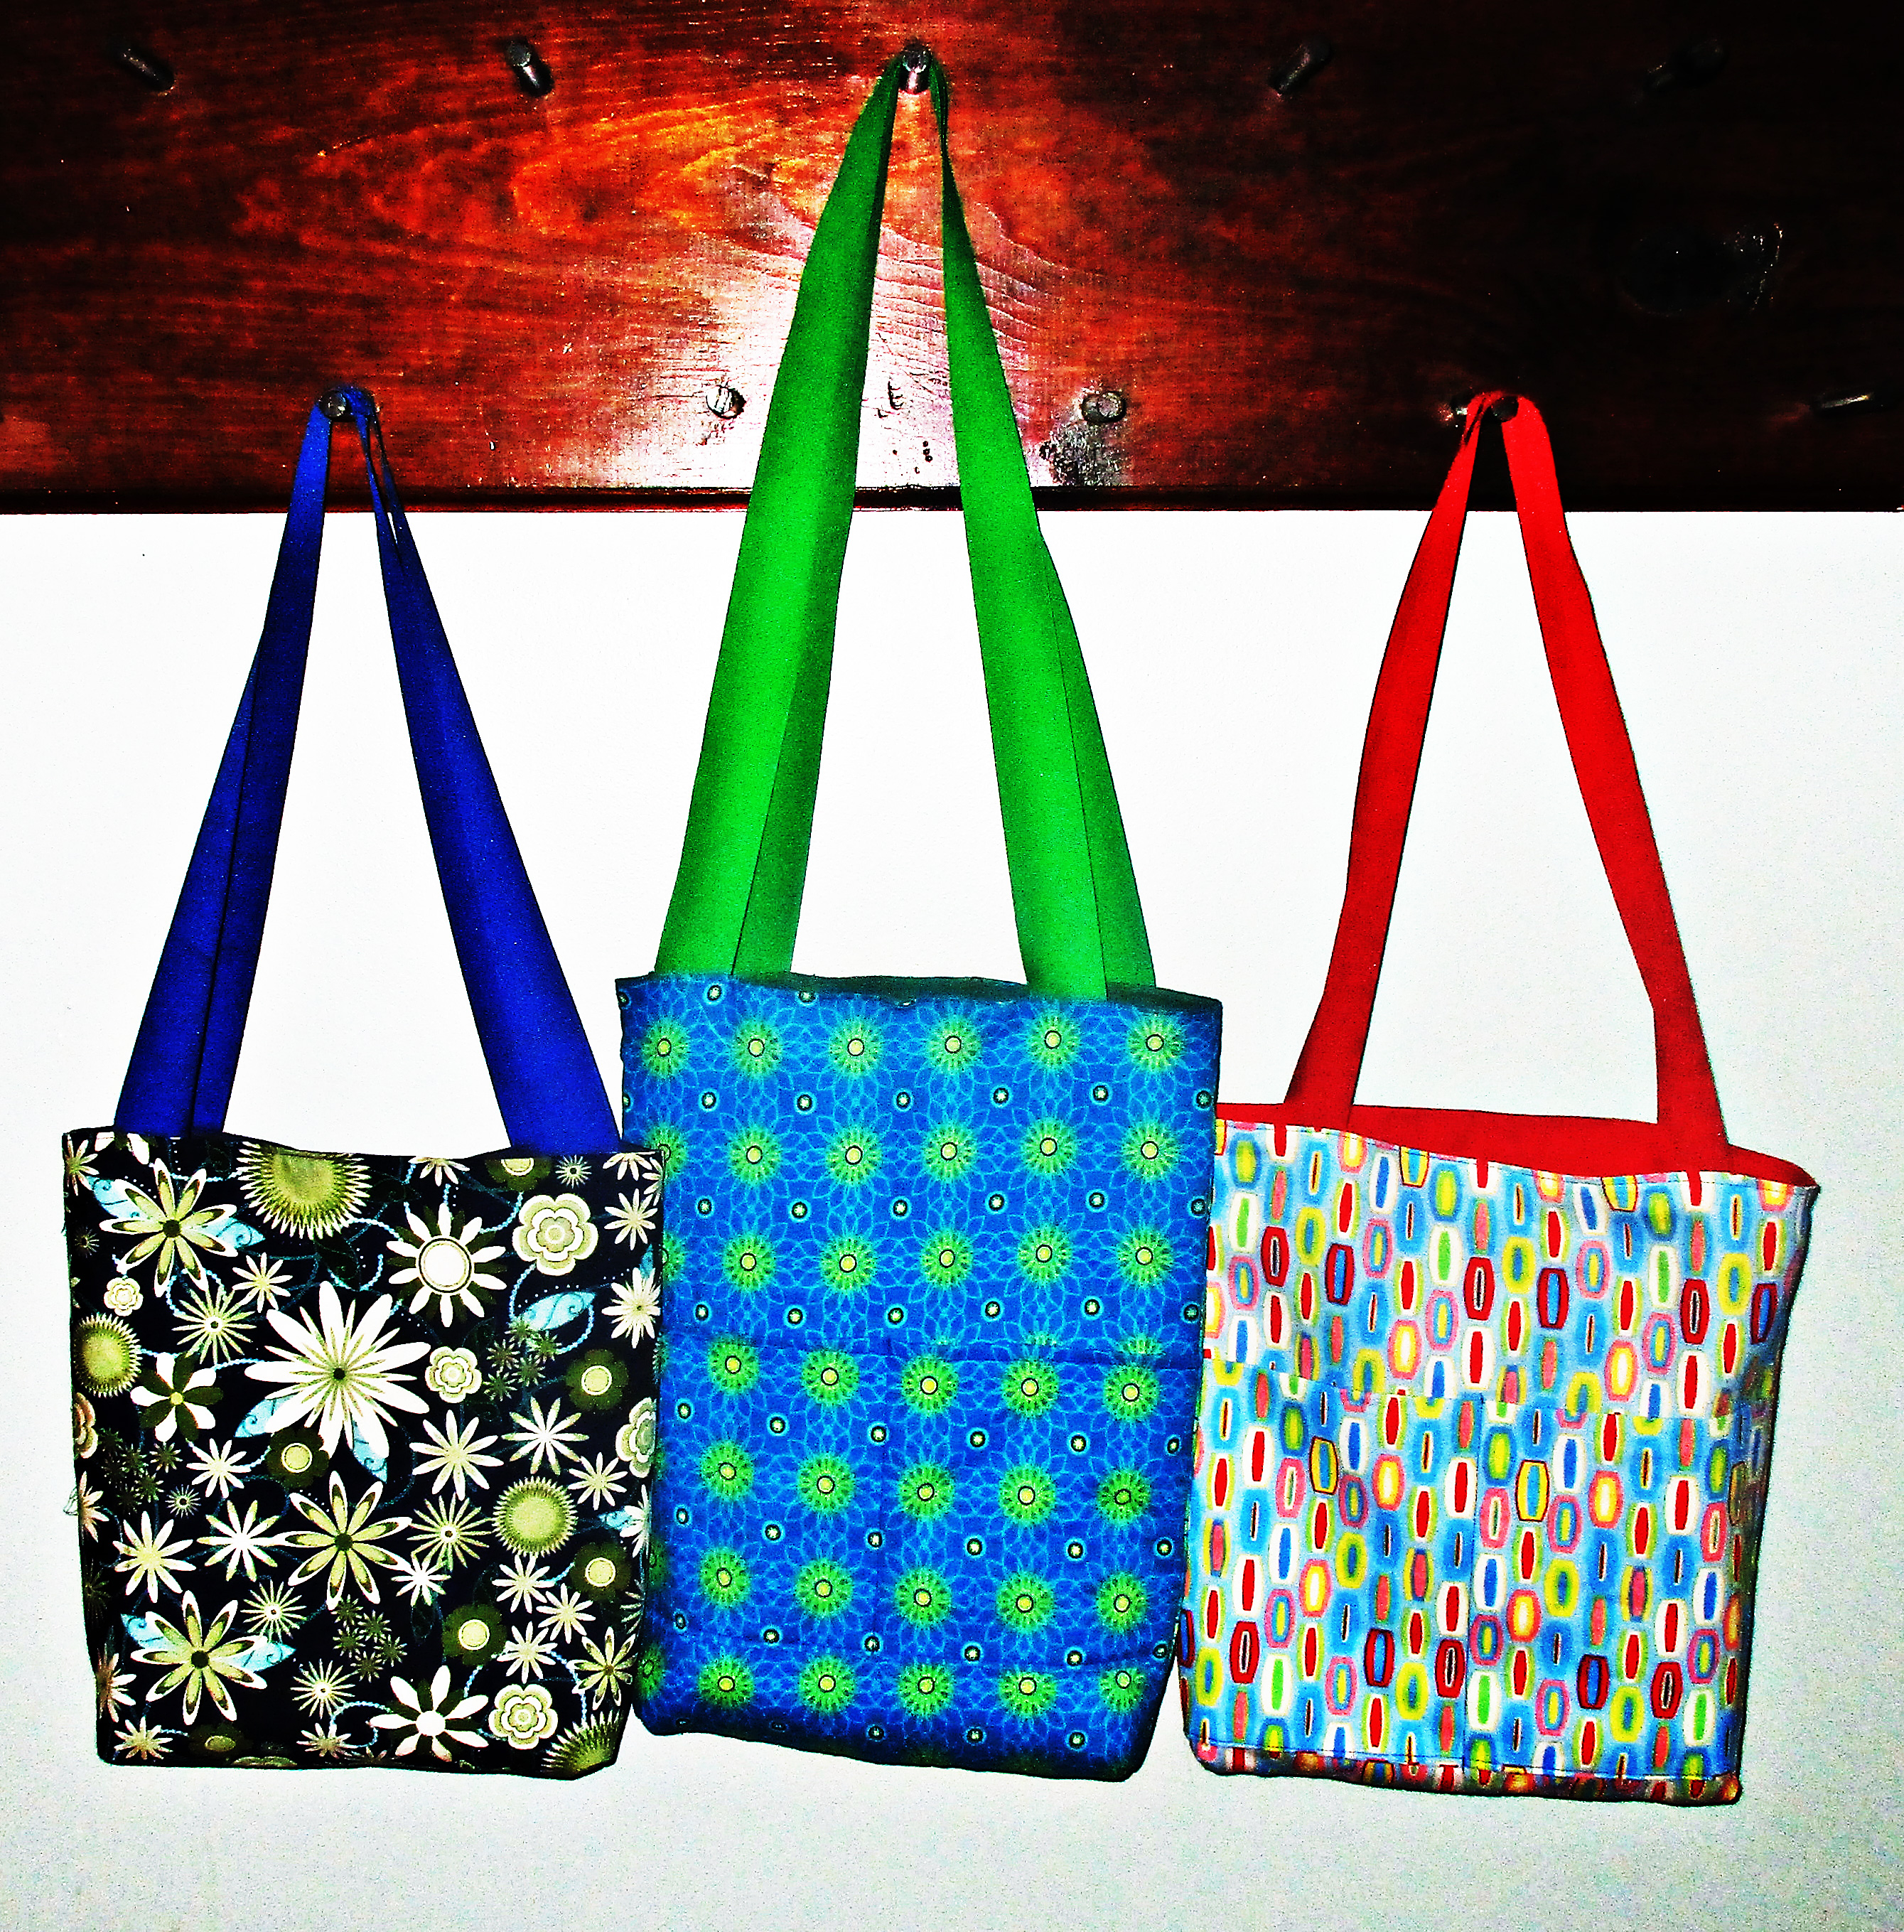 Diy Reversible Tote Bag · How To Make A Reversible Tote · Sewing on Cut Out  + Keep